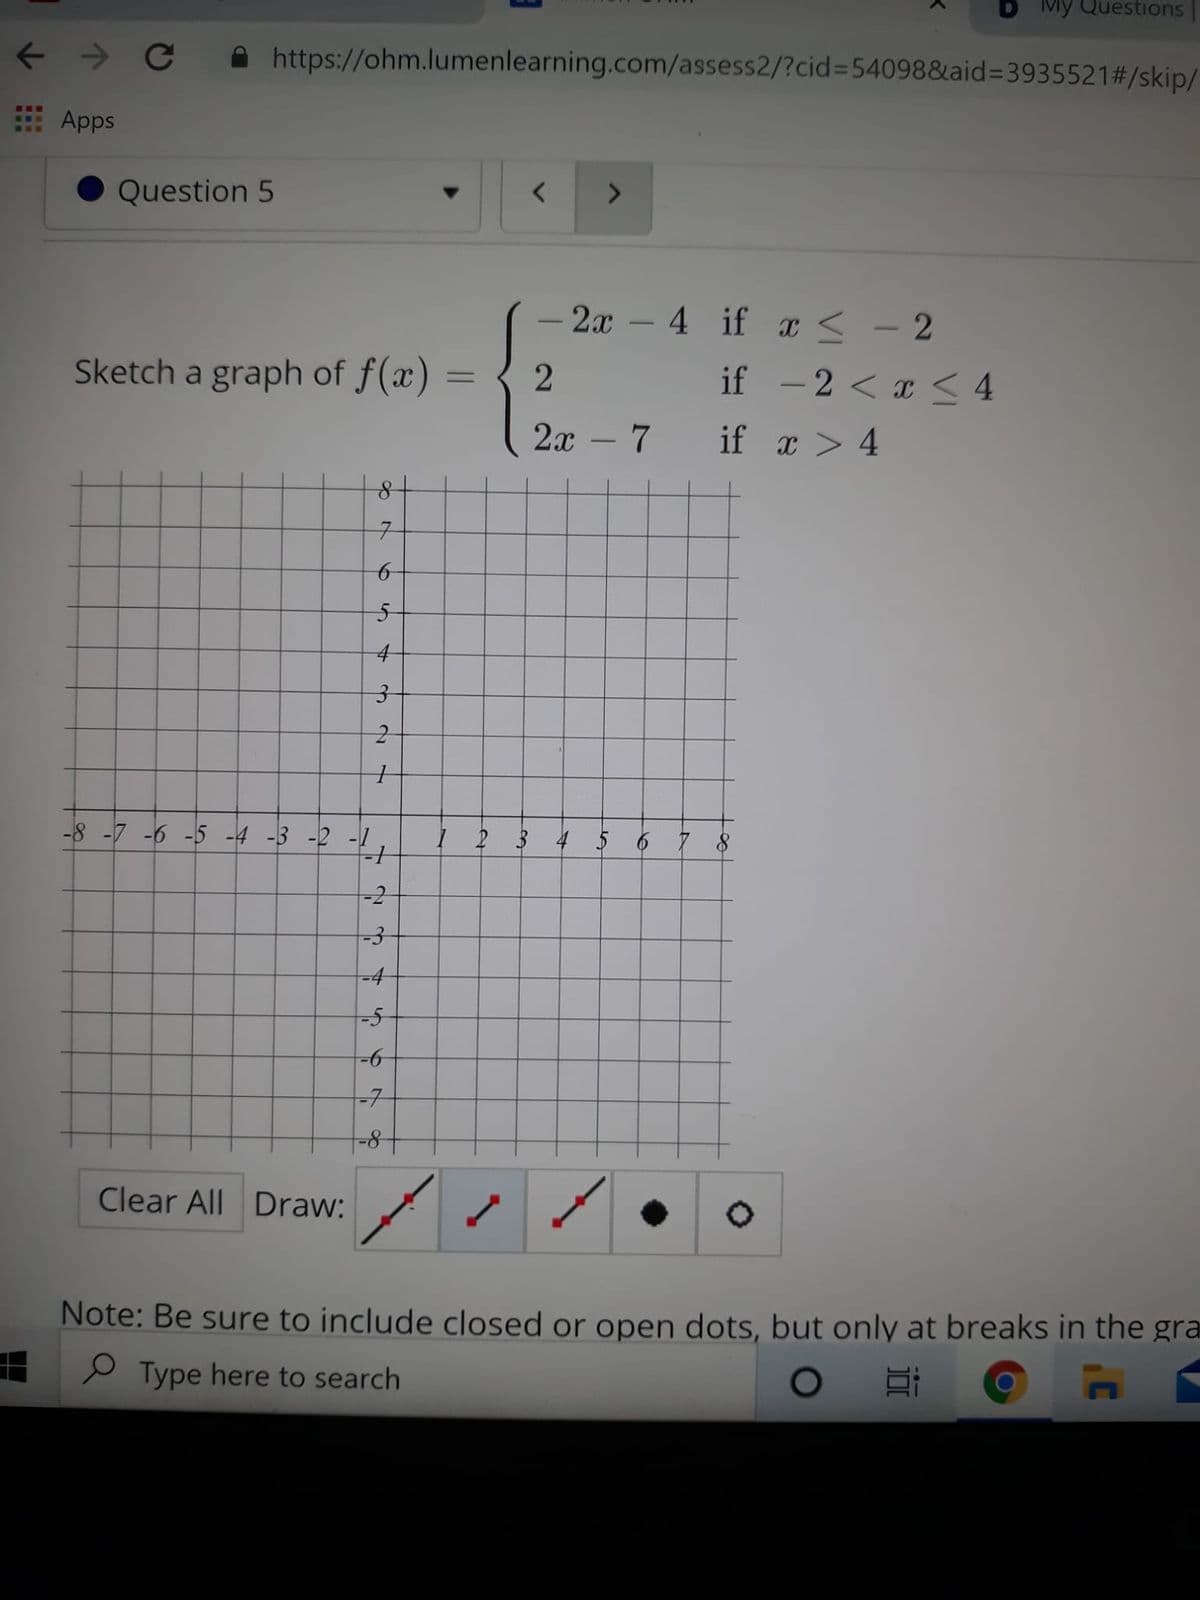 Mỹ Questions
https://ohm.lumenlearning.com/assess2/?cid%3D54098&aid=3935521#/skip/
...
Apps
RE.
Question 5
- 2x – 4 if x < - 2
-
Sketch a graph of f(x)
if - 2 < x < 4
2х - 7
if x > 4
-8 -7 -6 -5 -4 -3 -2 -1
I 2 3 4 5 6 7 8
-2
-4
-5
-
-7
8-
Clear All Draw:
Note: Be sure to include closed or open dots, but only at breaks in the gra
e Type here to search
2]
6
